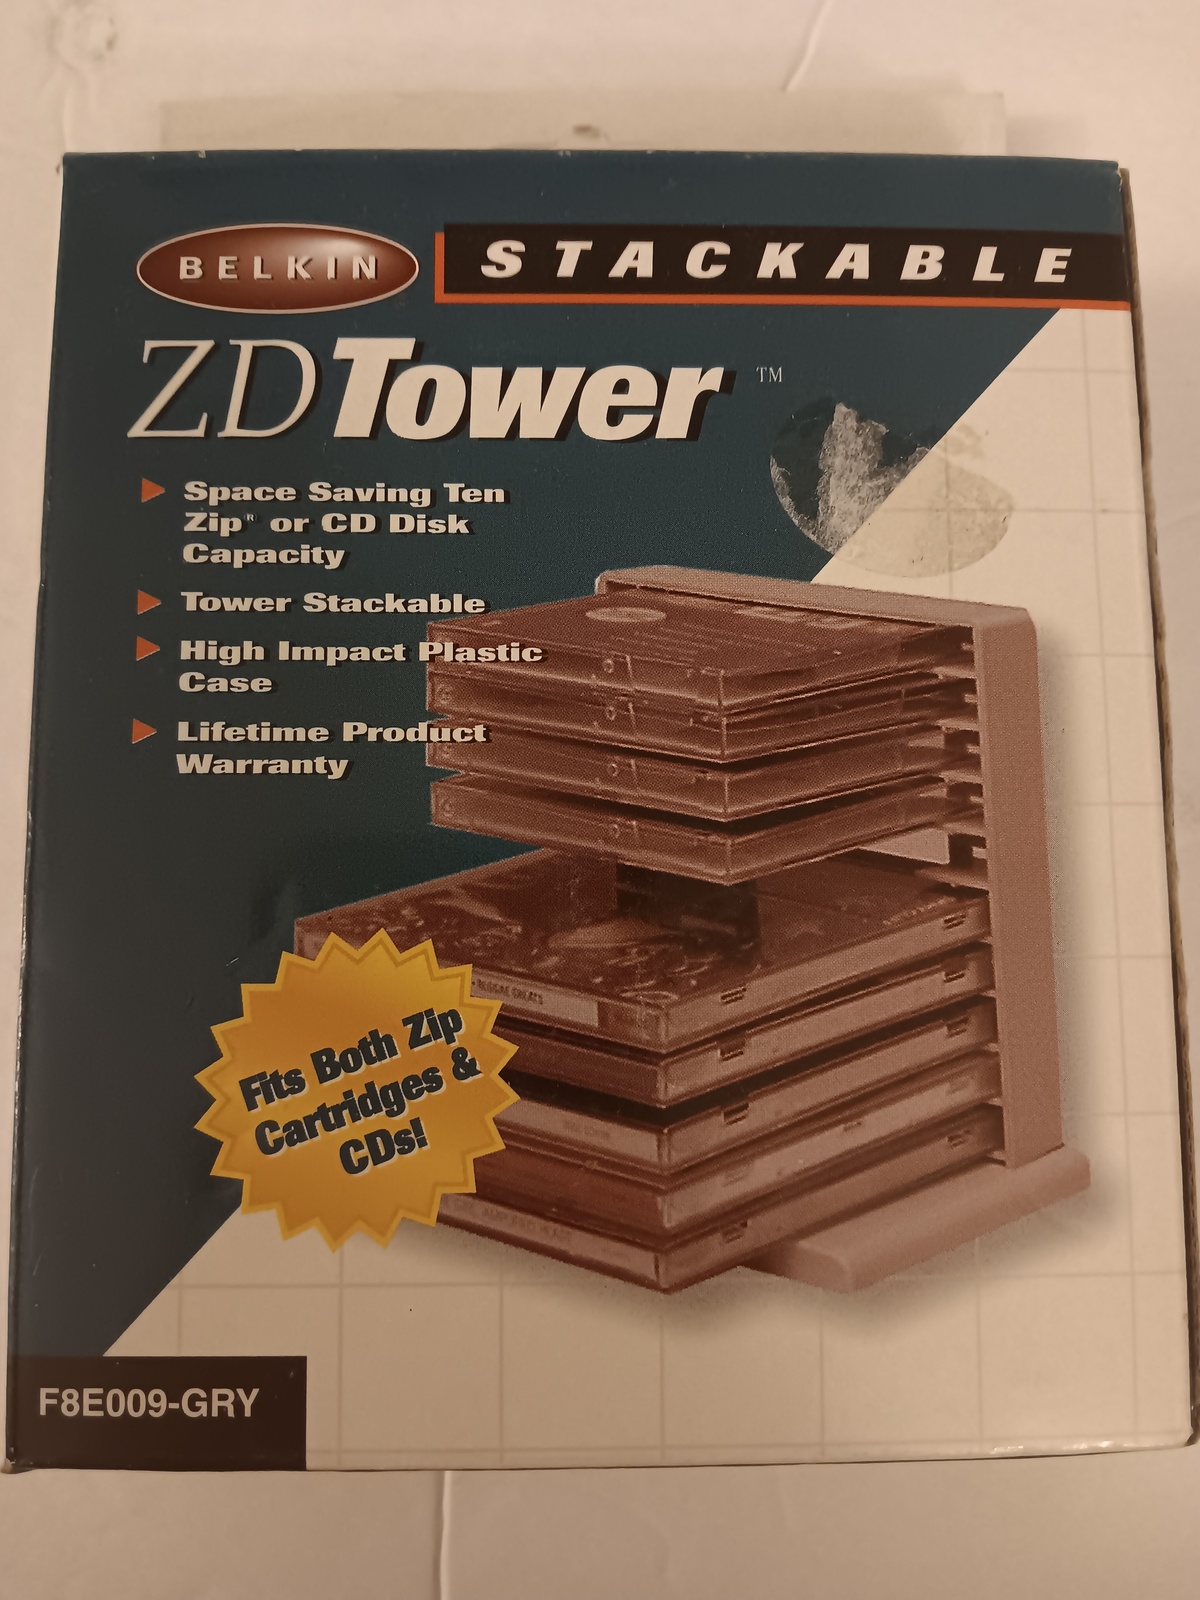 Belkin ZD Tower Stackable Zip Disk or CD Tower Holds 10 Disks New Old Stock - $9.99